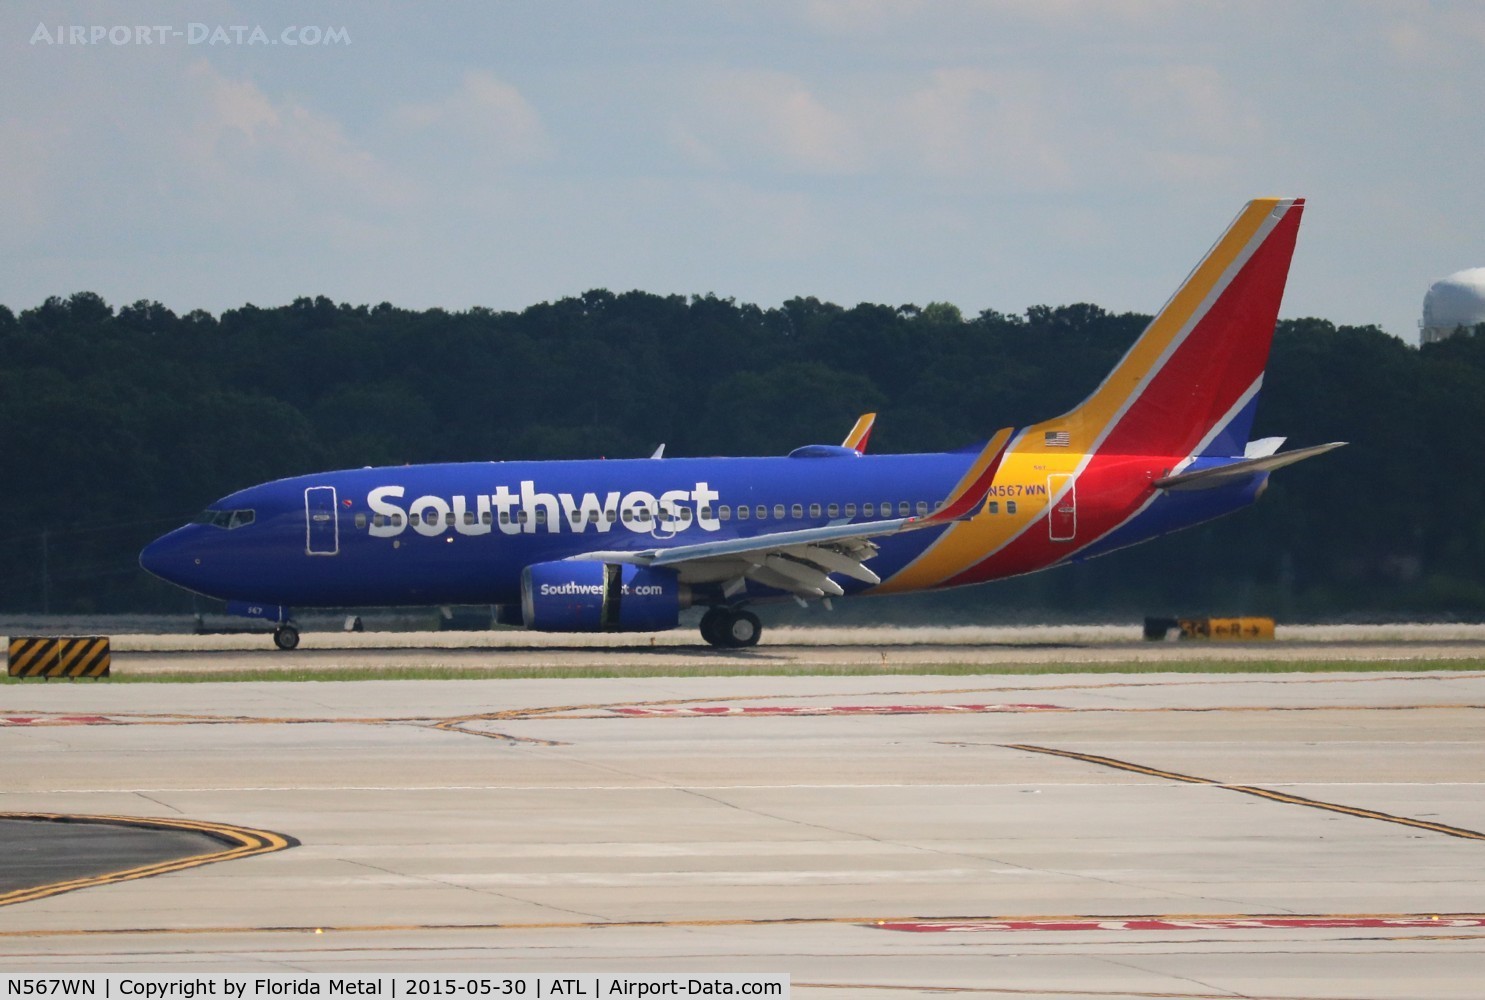 N567WN, 2002 Boeing 737-7CT C/N 32747, According to Planespotters.net, Southwest just picked this 737 up from West Jet.